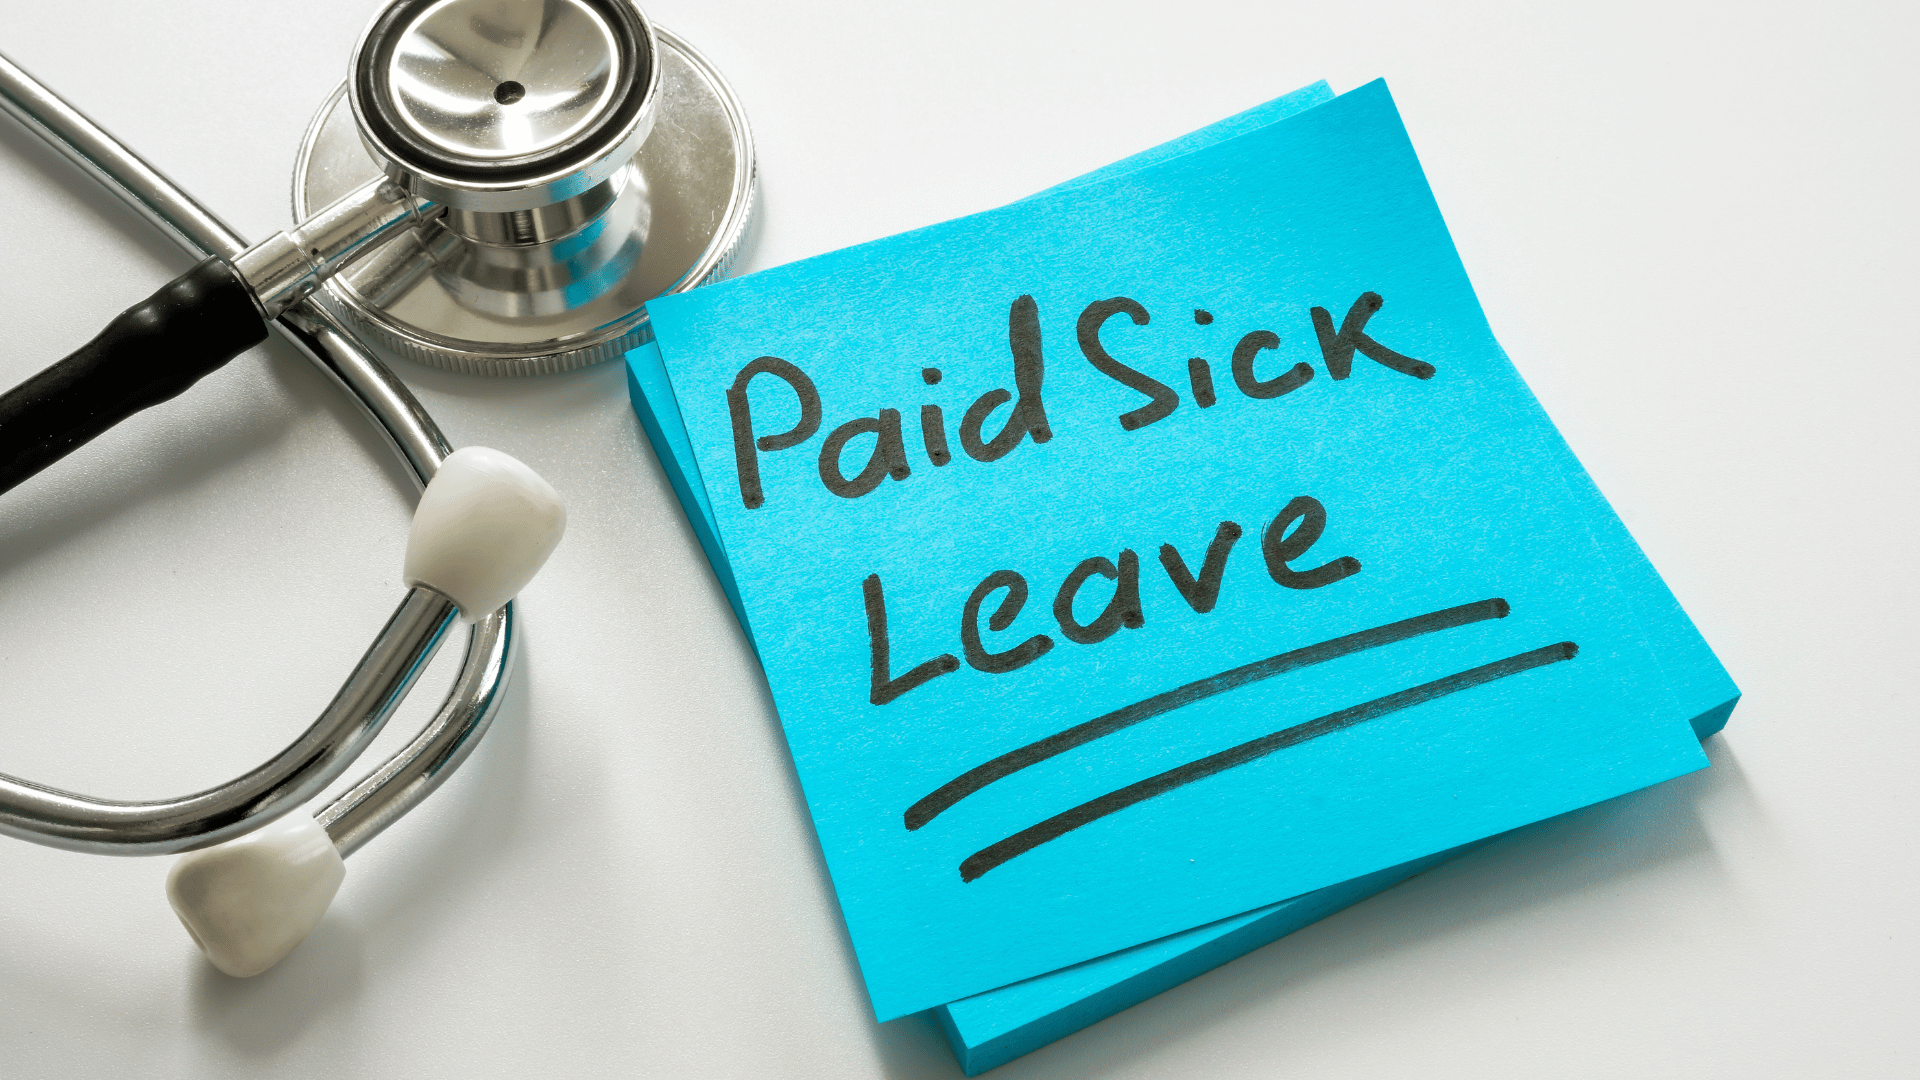 New York City Workers Can Take Advantage of Enhanced Sick Leave Rights